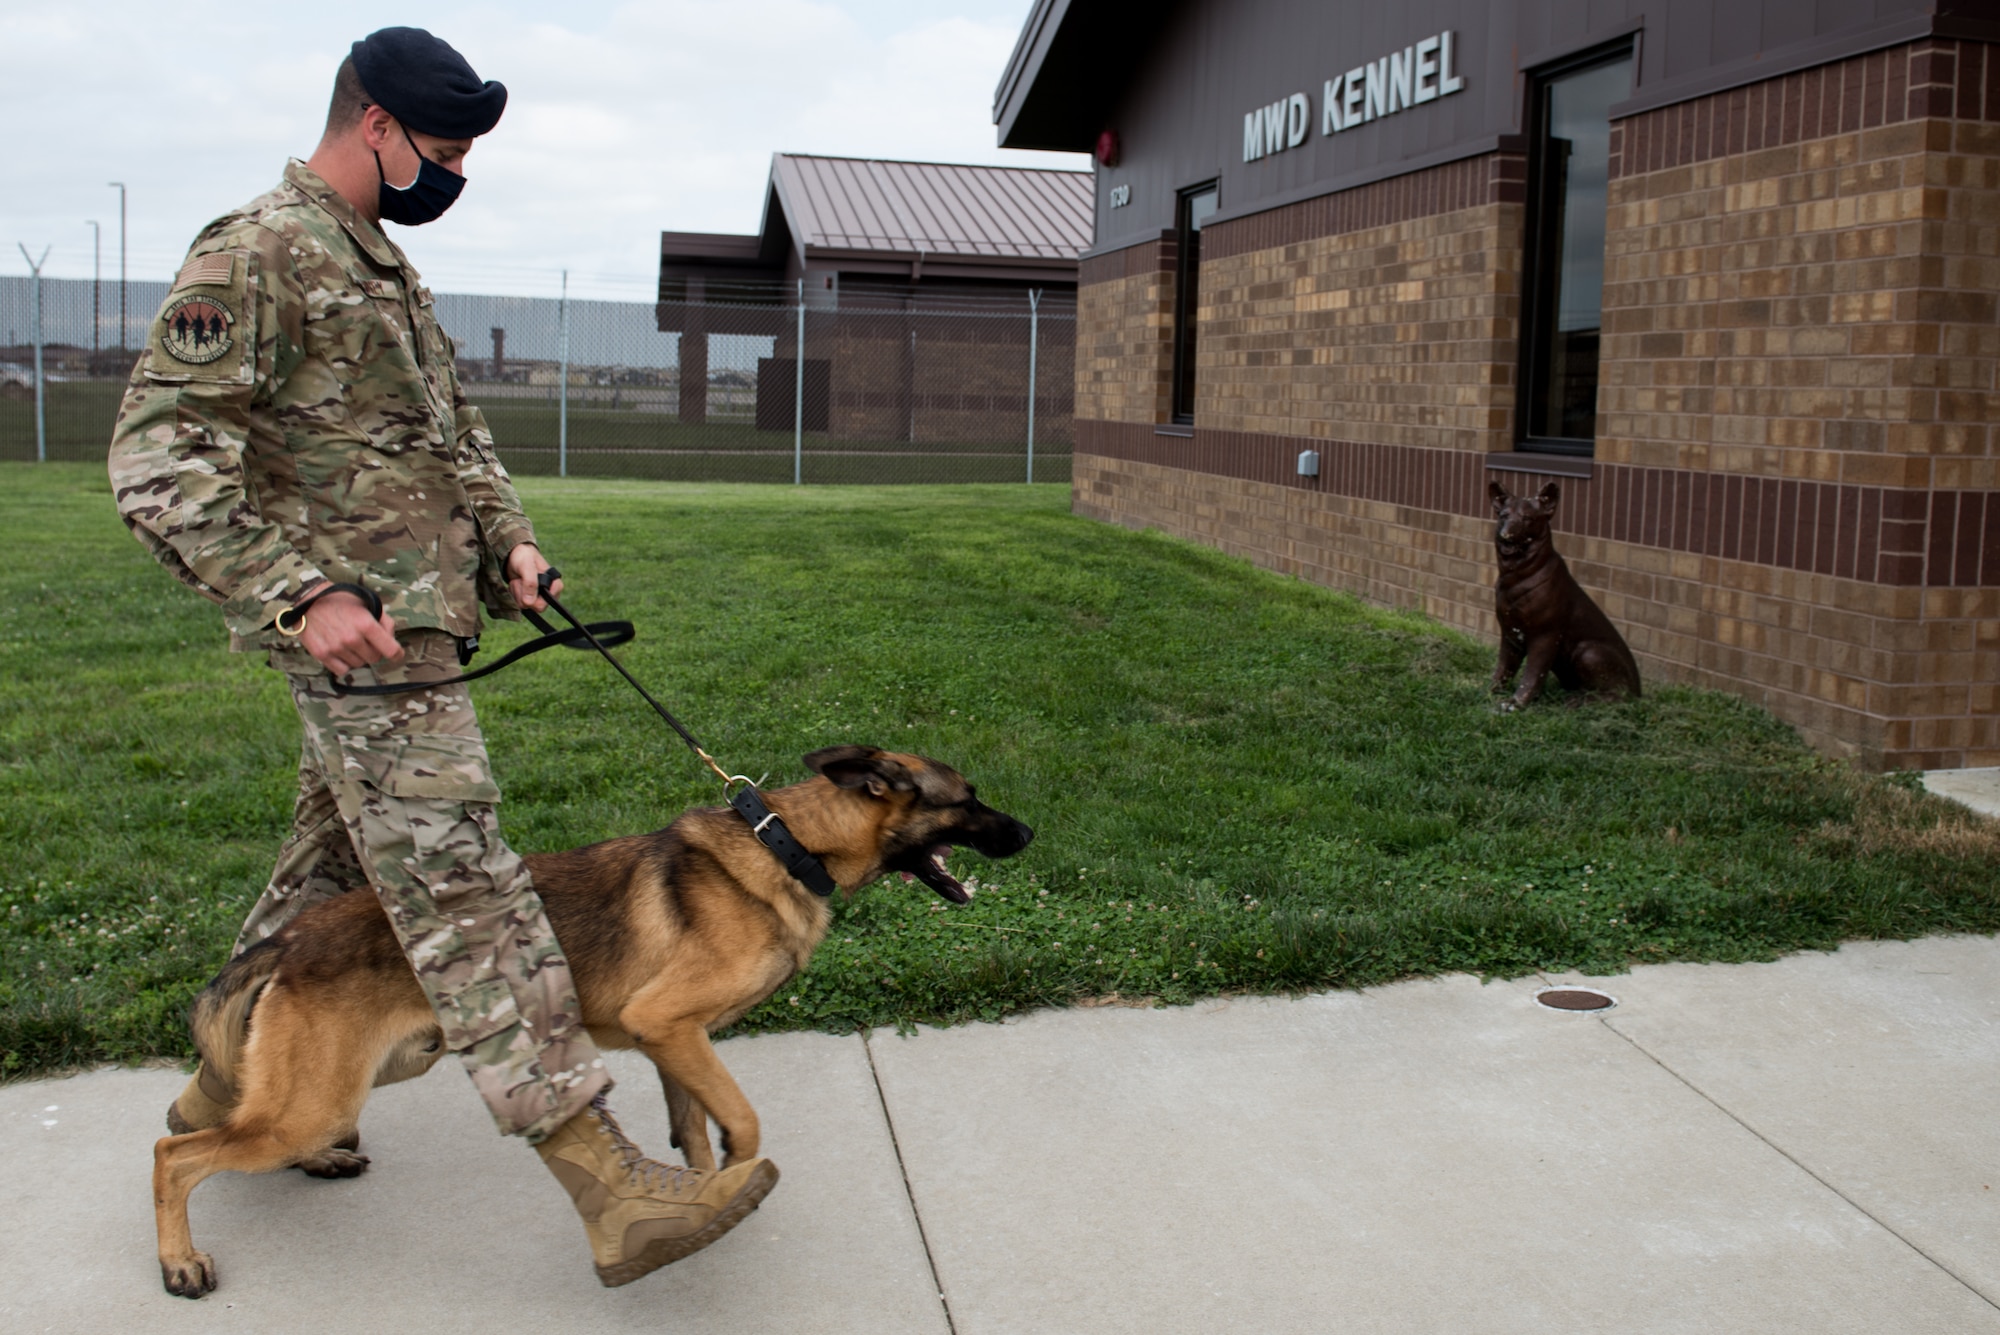 U.S. Air Force Tech. Sgt. Benjamin Vanney, 509th Security Forces Squadron Military Working Dog trainer, walks to the kennels with MWD Oscar, assigned to the 509th SFS at Whiteman Air Force Base, Missouri, Aug. 7, 2020. Oscar became the newest and youngest MWD for Whiteman AFB after graduating the Military Working Dog Course at Lackland AFB, Texas. (U.S. Air Force photo by Airman 1st Class Christina Carter)